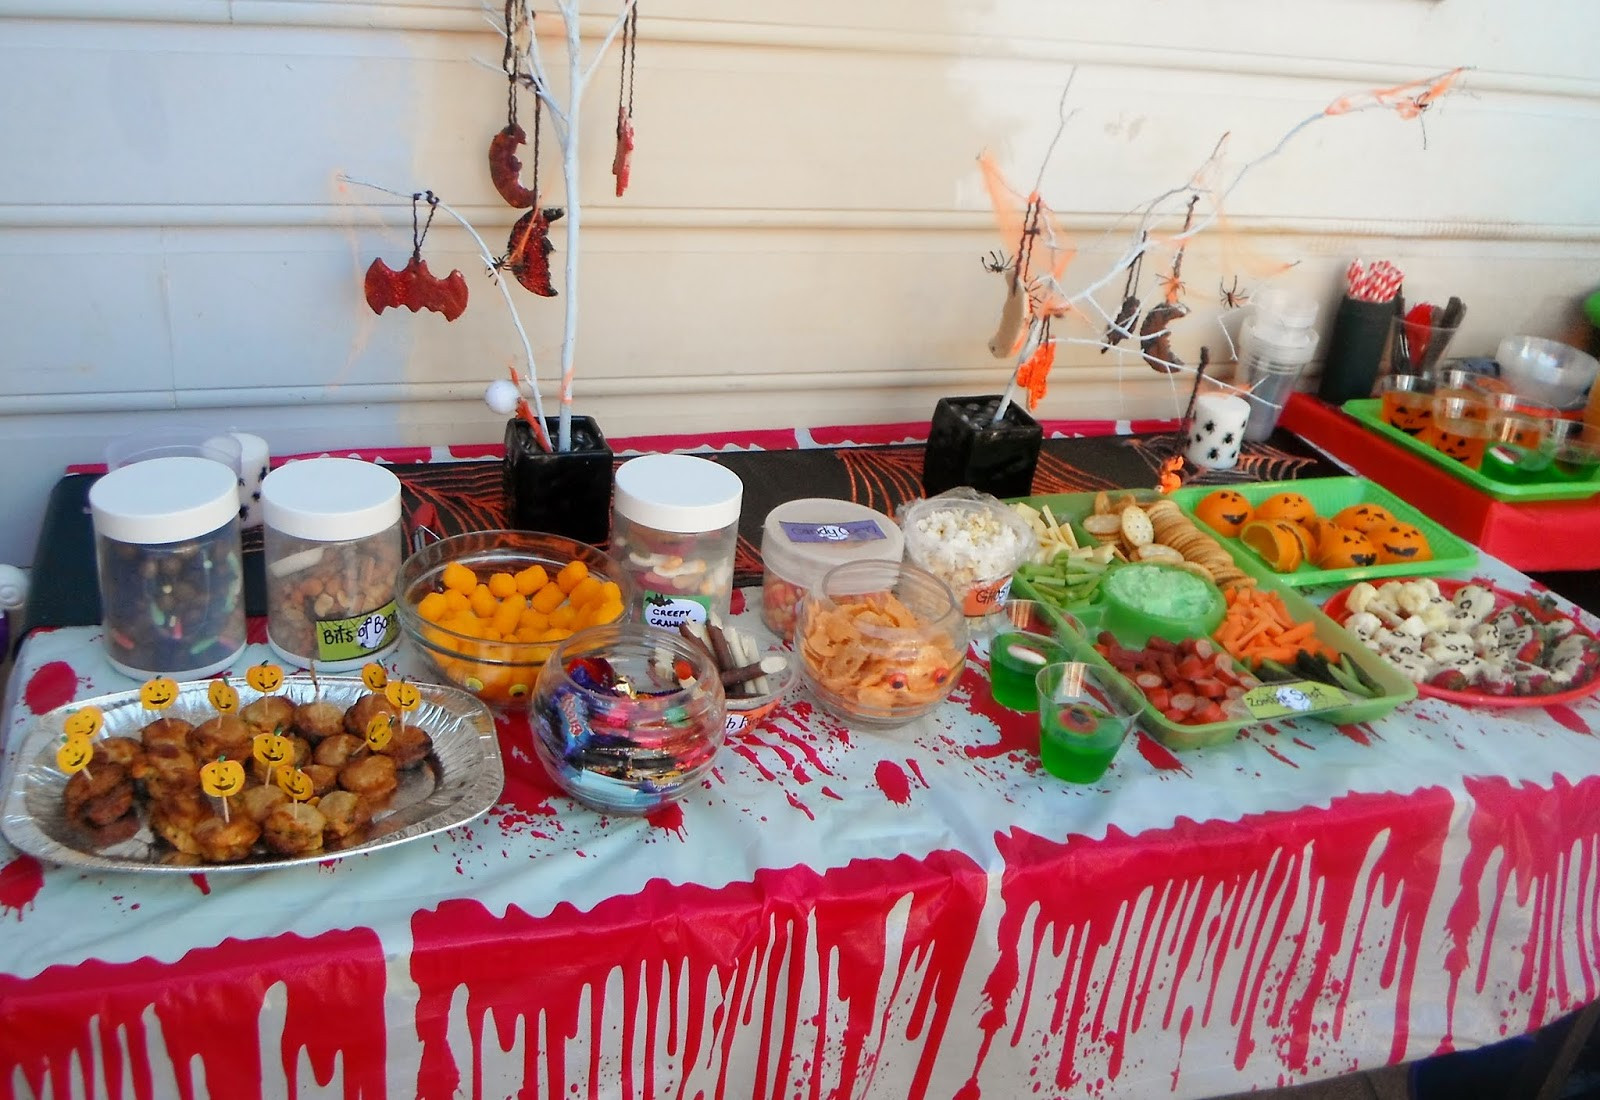 Halloween Kids Party Food Ideas
 Adventures at home with Mum Halloween Party Food